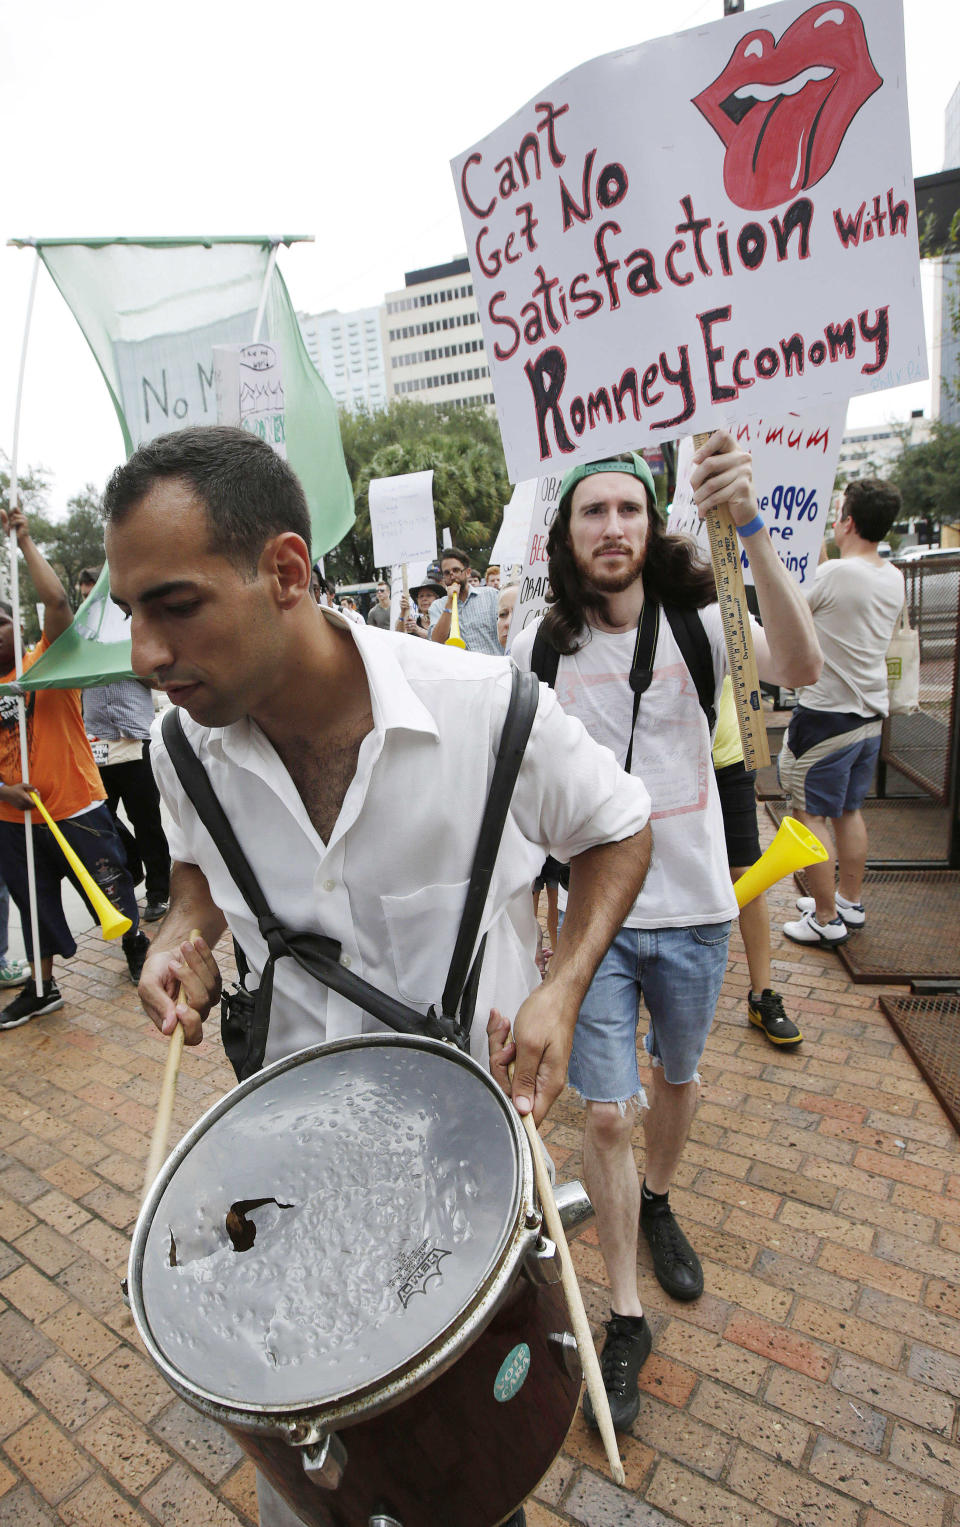 Ganzalo Valdes, of Tampa, Fla., marches with demonstrators in Tampa, Fla., Sunday, Aug. 26, 2012. Hundreds of protestors gathered in Gas Light Park in downtown Tampa to march in demonstration against the Republican National Convention. (AP Photo/Dave Martin)